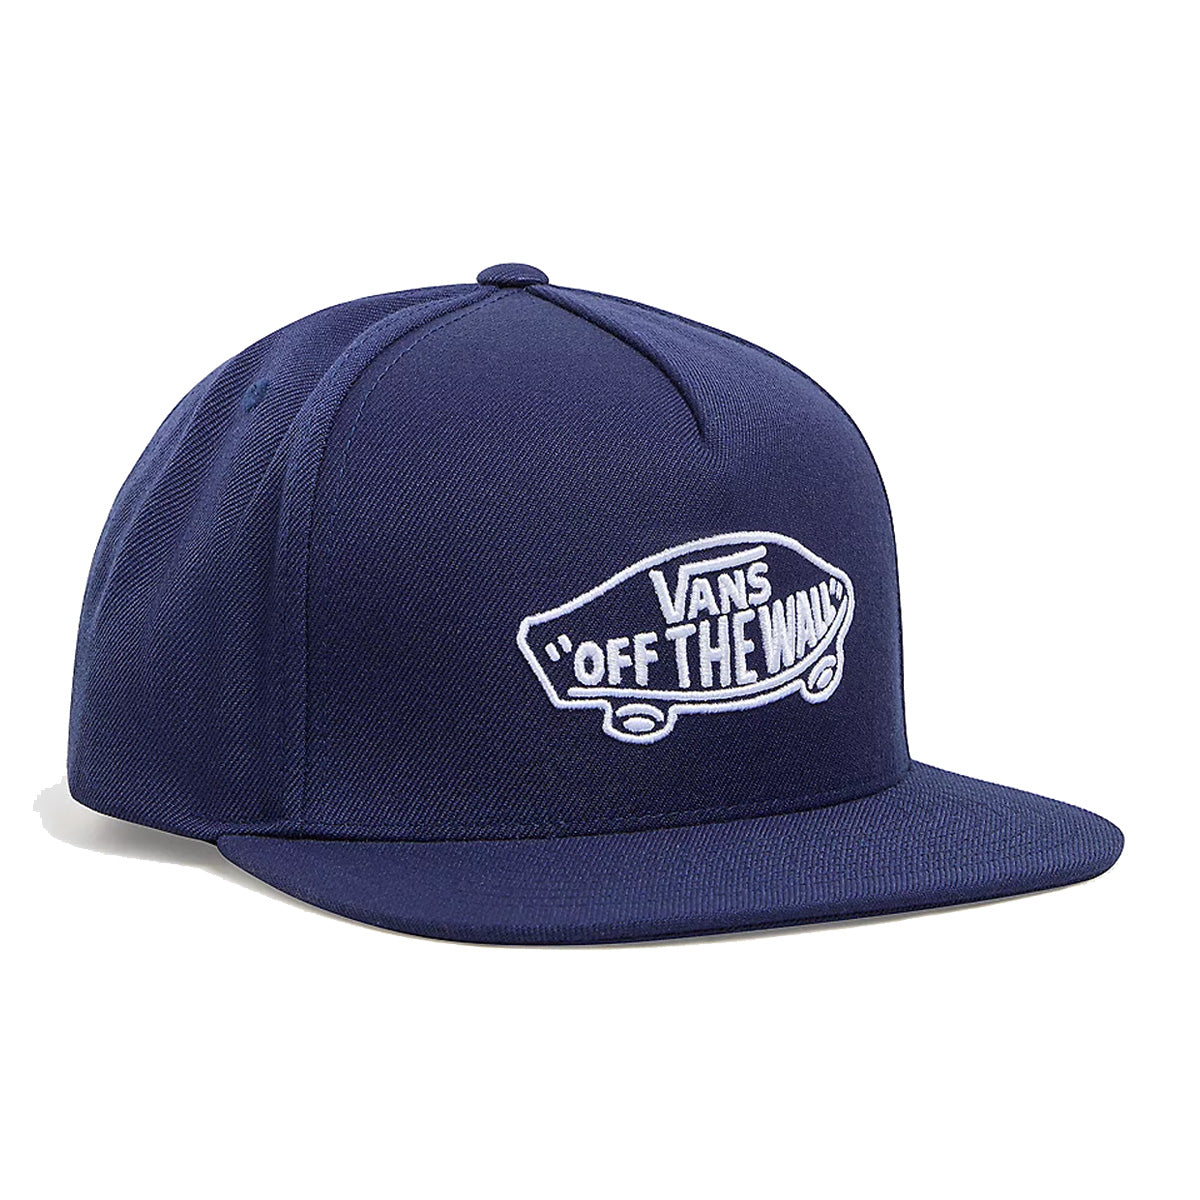 Navy blue vans six panel cap with white vans “off the wall” logo on front and adjustable strap on back. Free uk shipping over £50